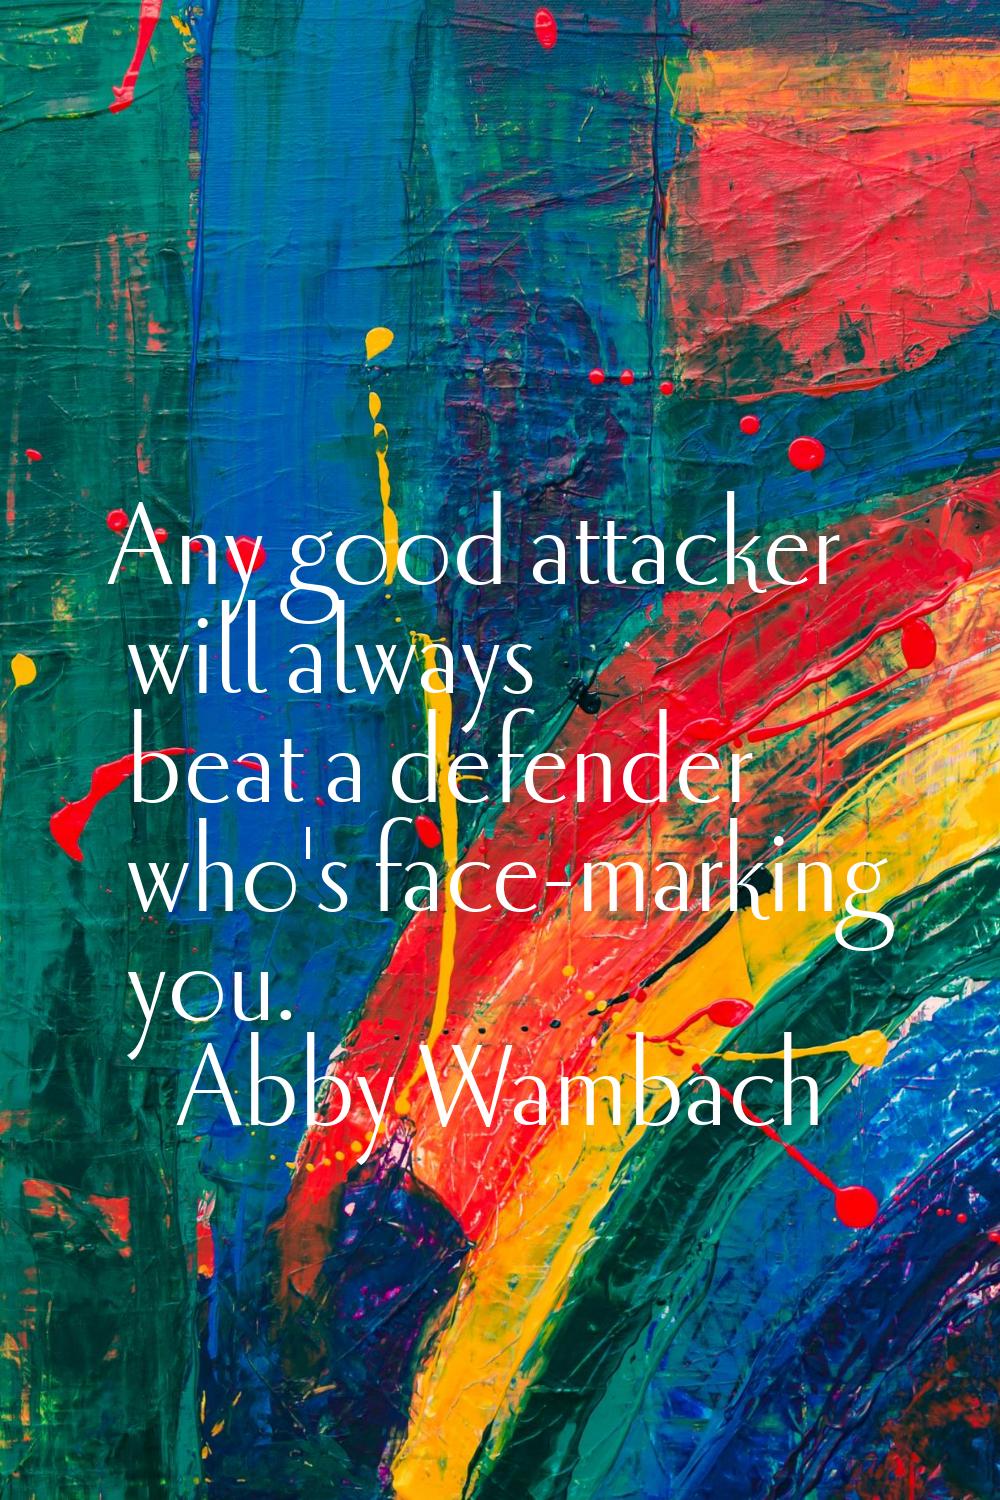 Any good attacker will always beat a defender who's face-marking you.